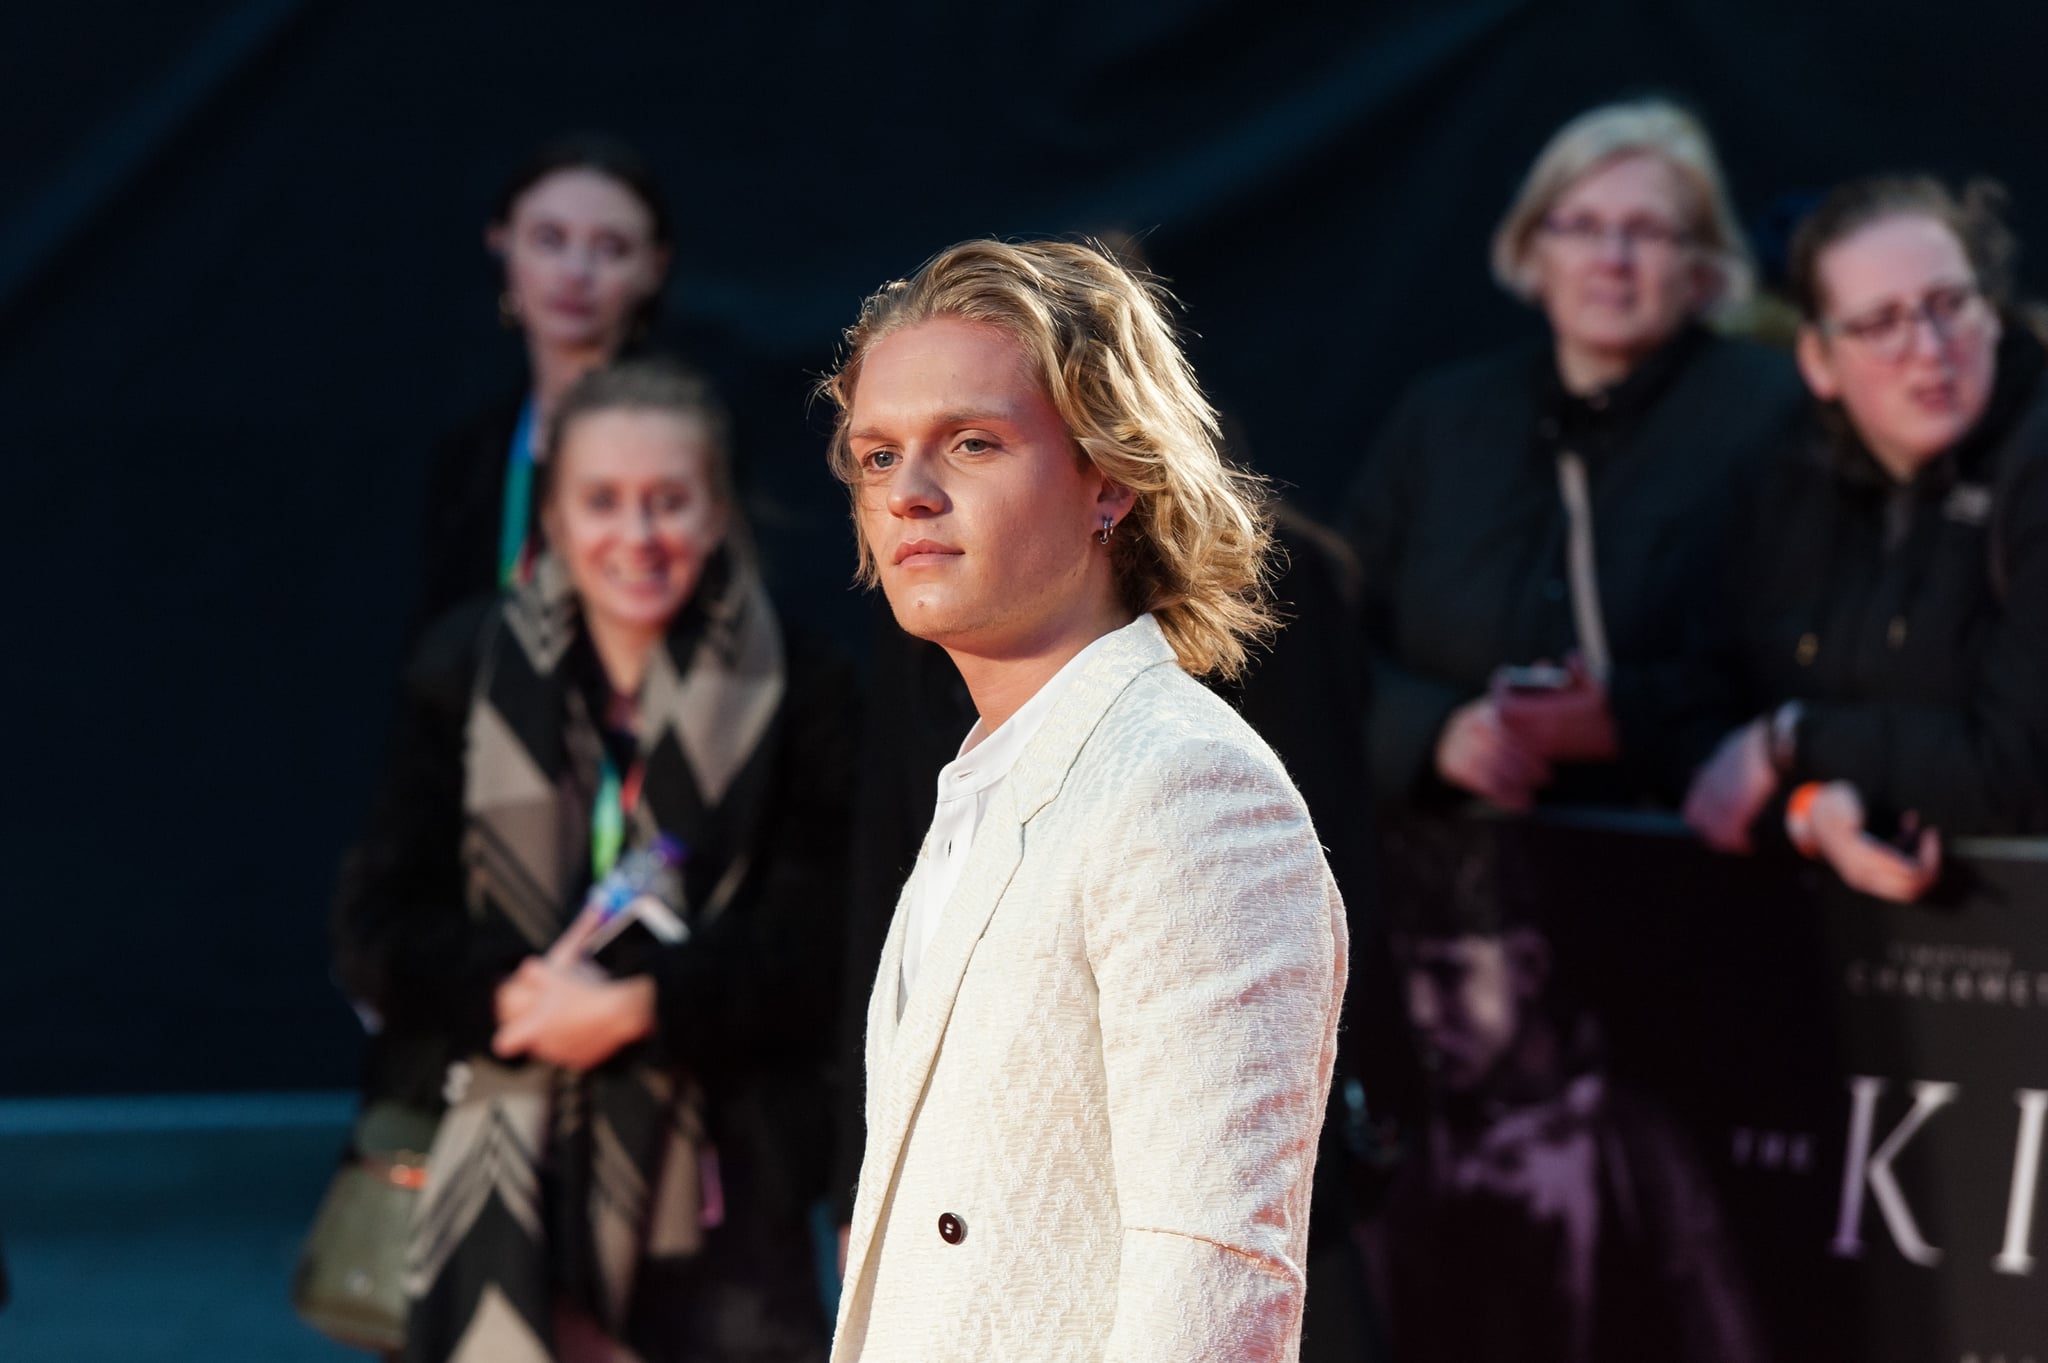 LONDON, UNITED KINGDOM - OCTOBER 03: Tom Glynn-Carney attends the UK film premiere of 'The King' at Odeon Luxe Leicester Square during the 63rd BFI London Film Festival American Airlines Gala on 03 October, 2019 in London, England. (Photo credit should read Wiktor Szymanowicz/Future Publishing via Getty Images)